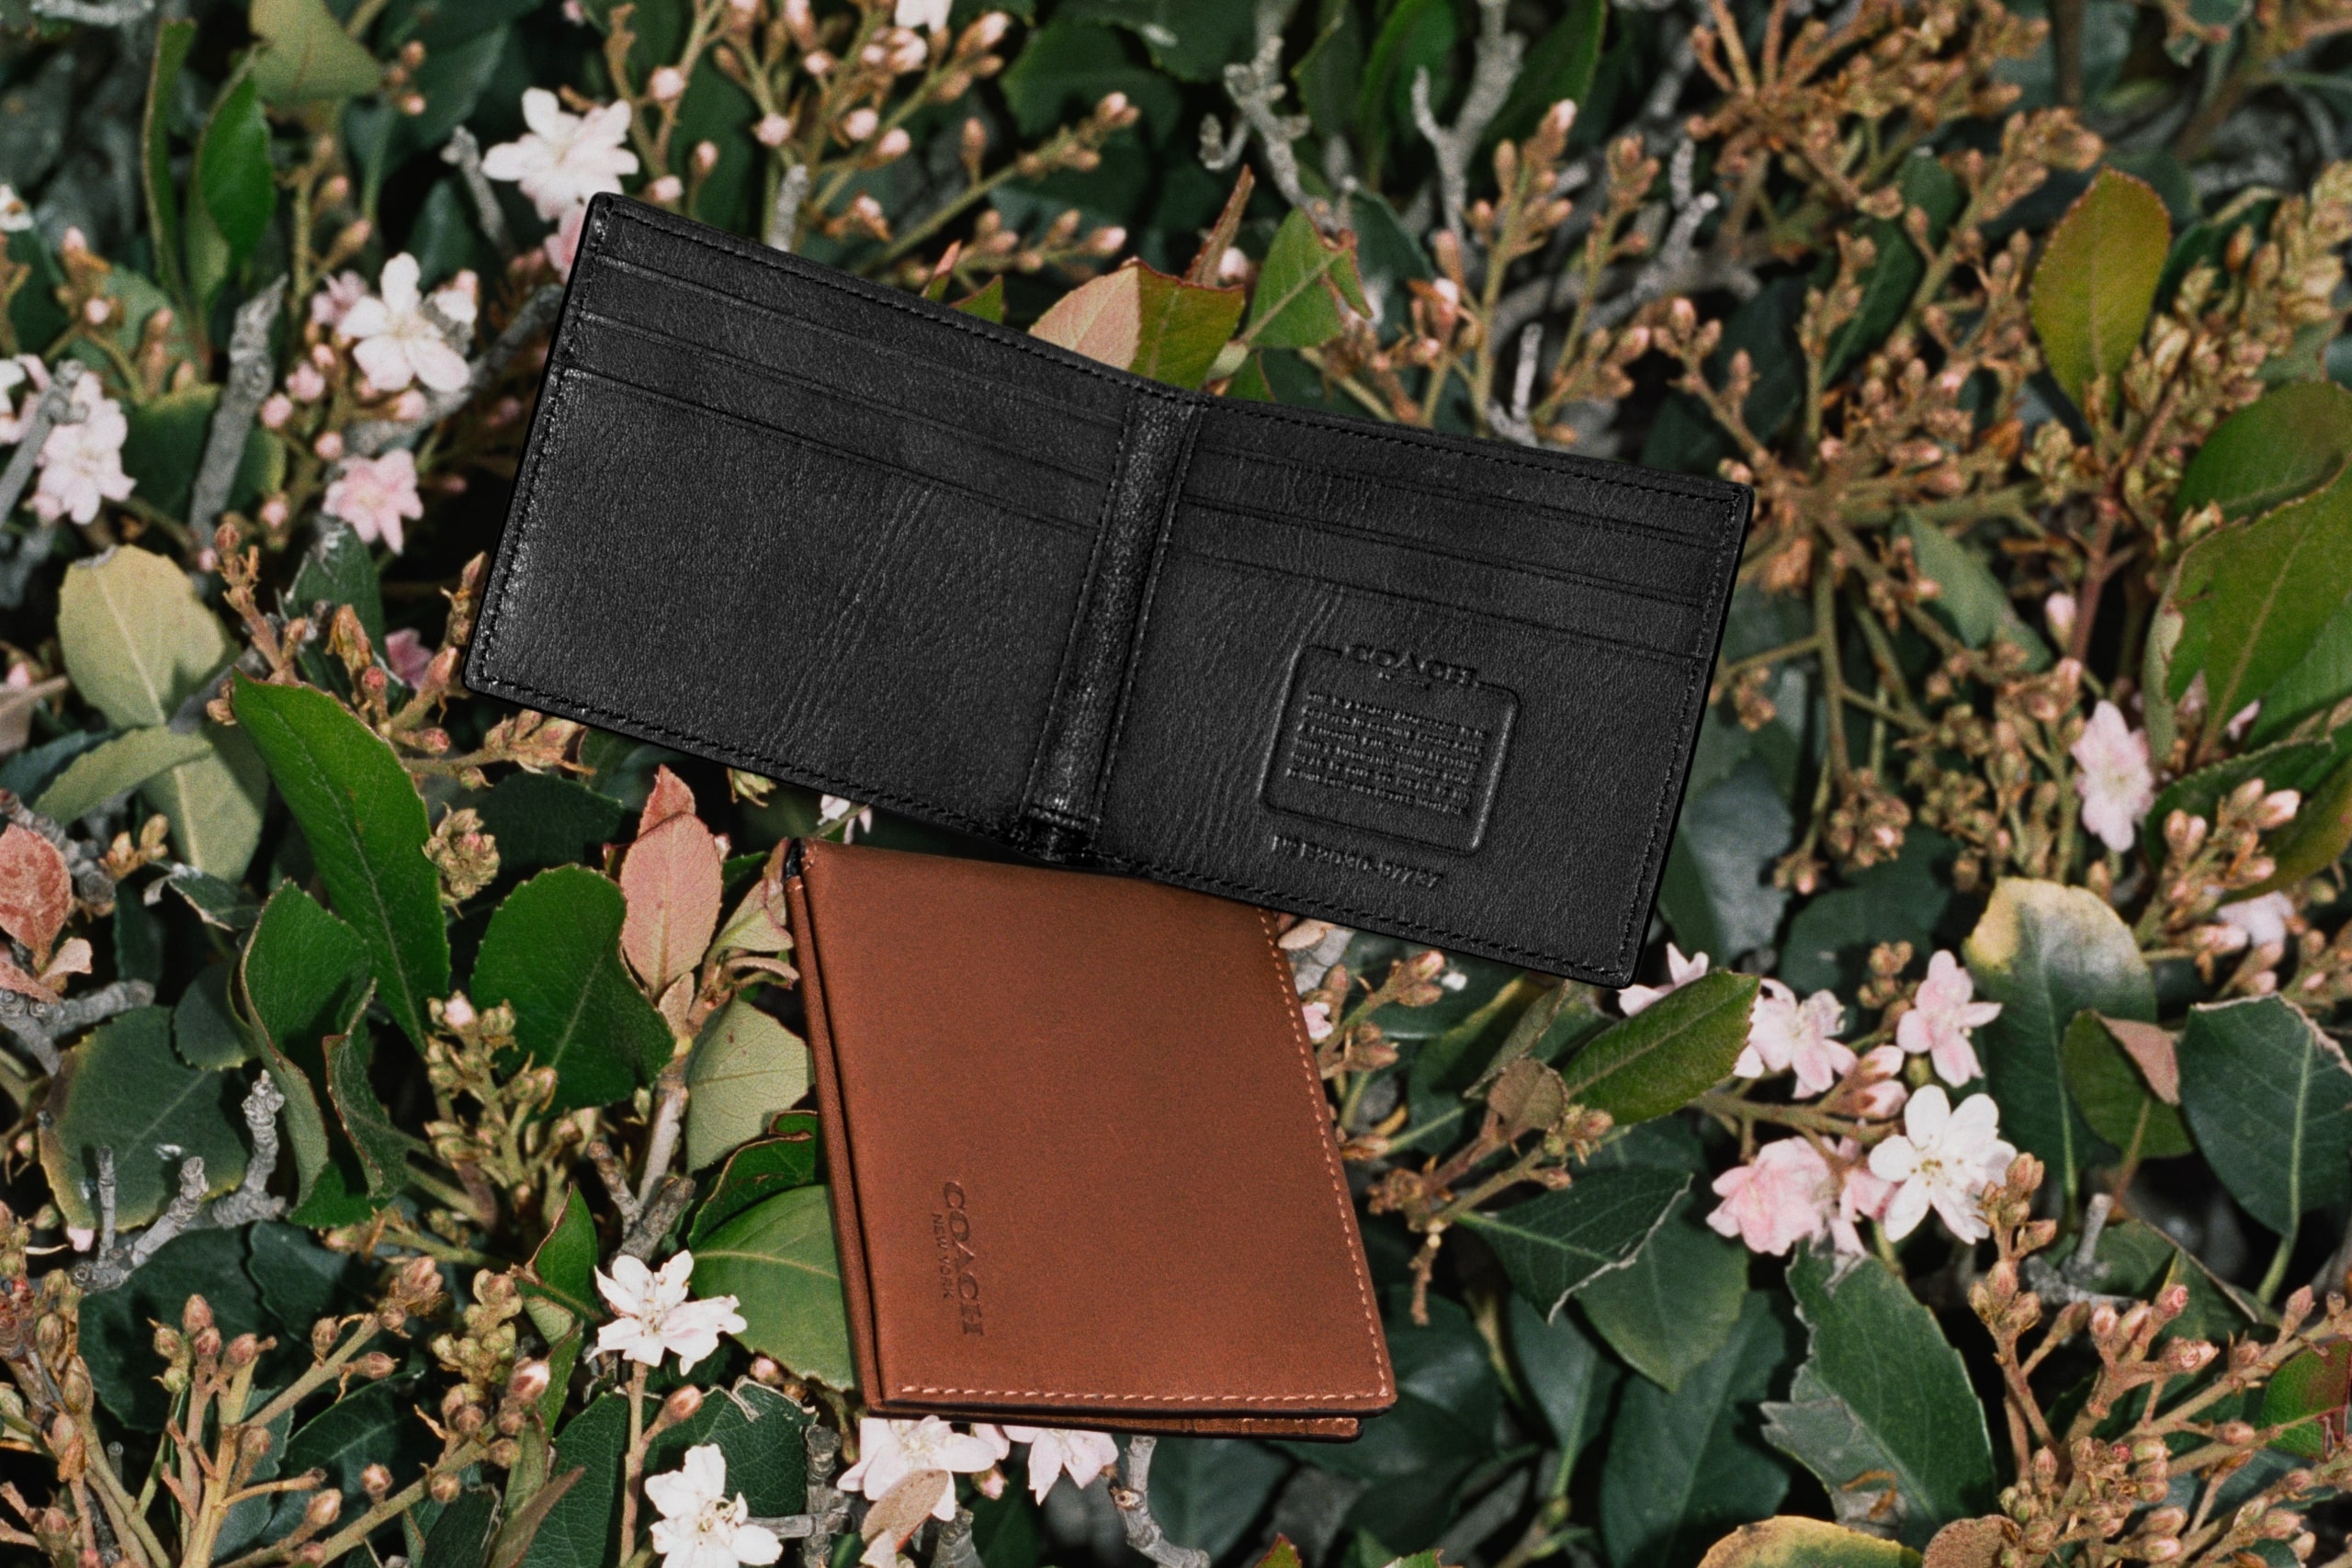 brown and black wallets on grass